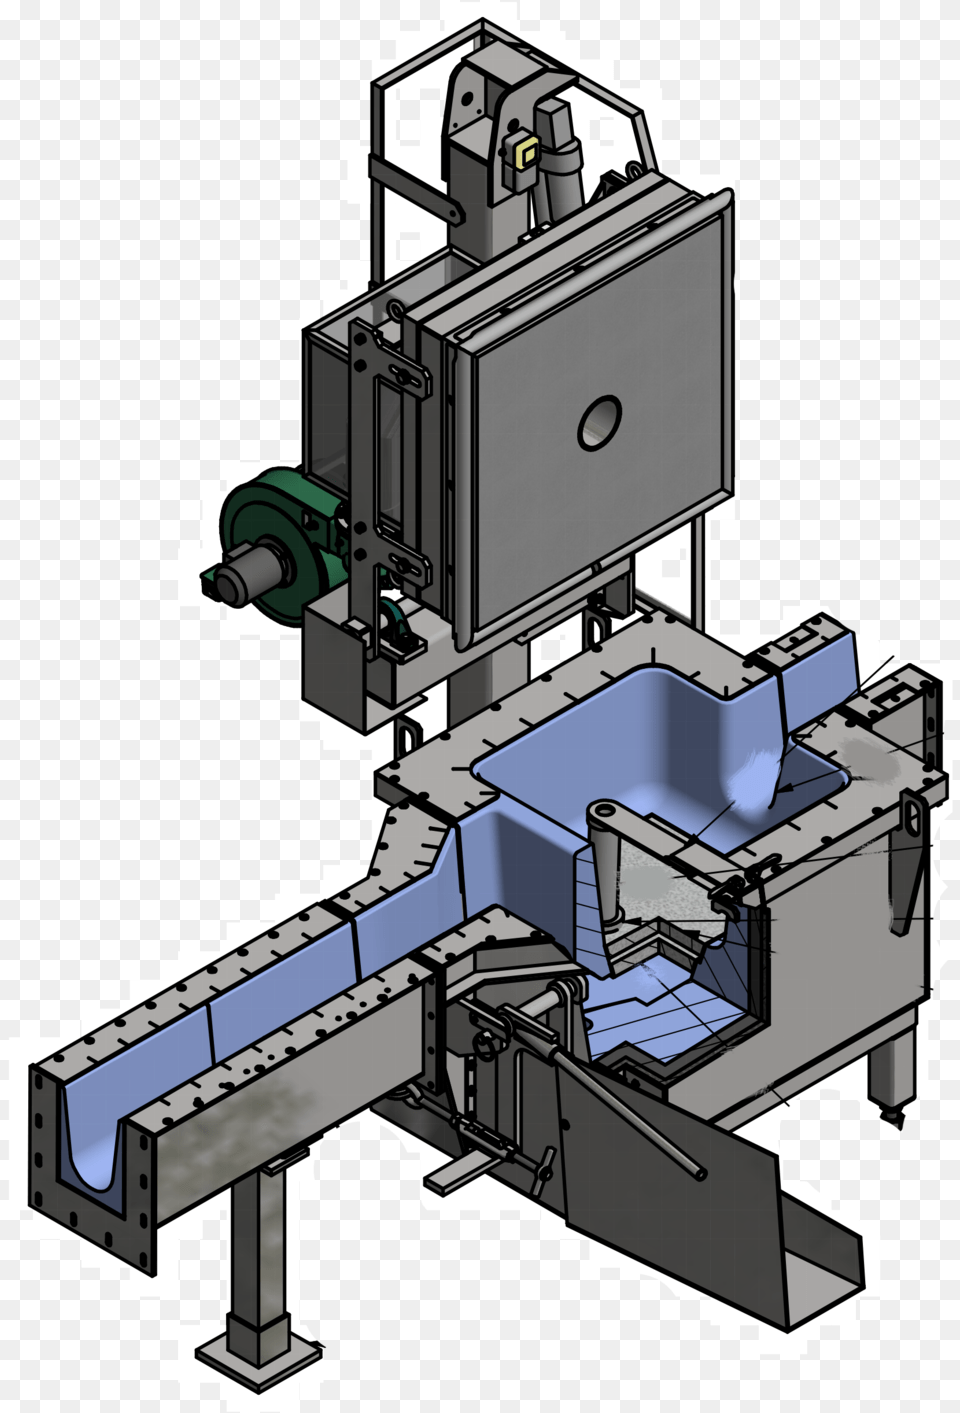 Chtizh 01 A0001 For Plant Presentation Machine Tool, Bulldozer, Cad Diagram, Diagram, Adult Png Image